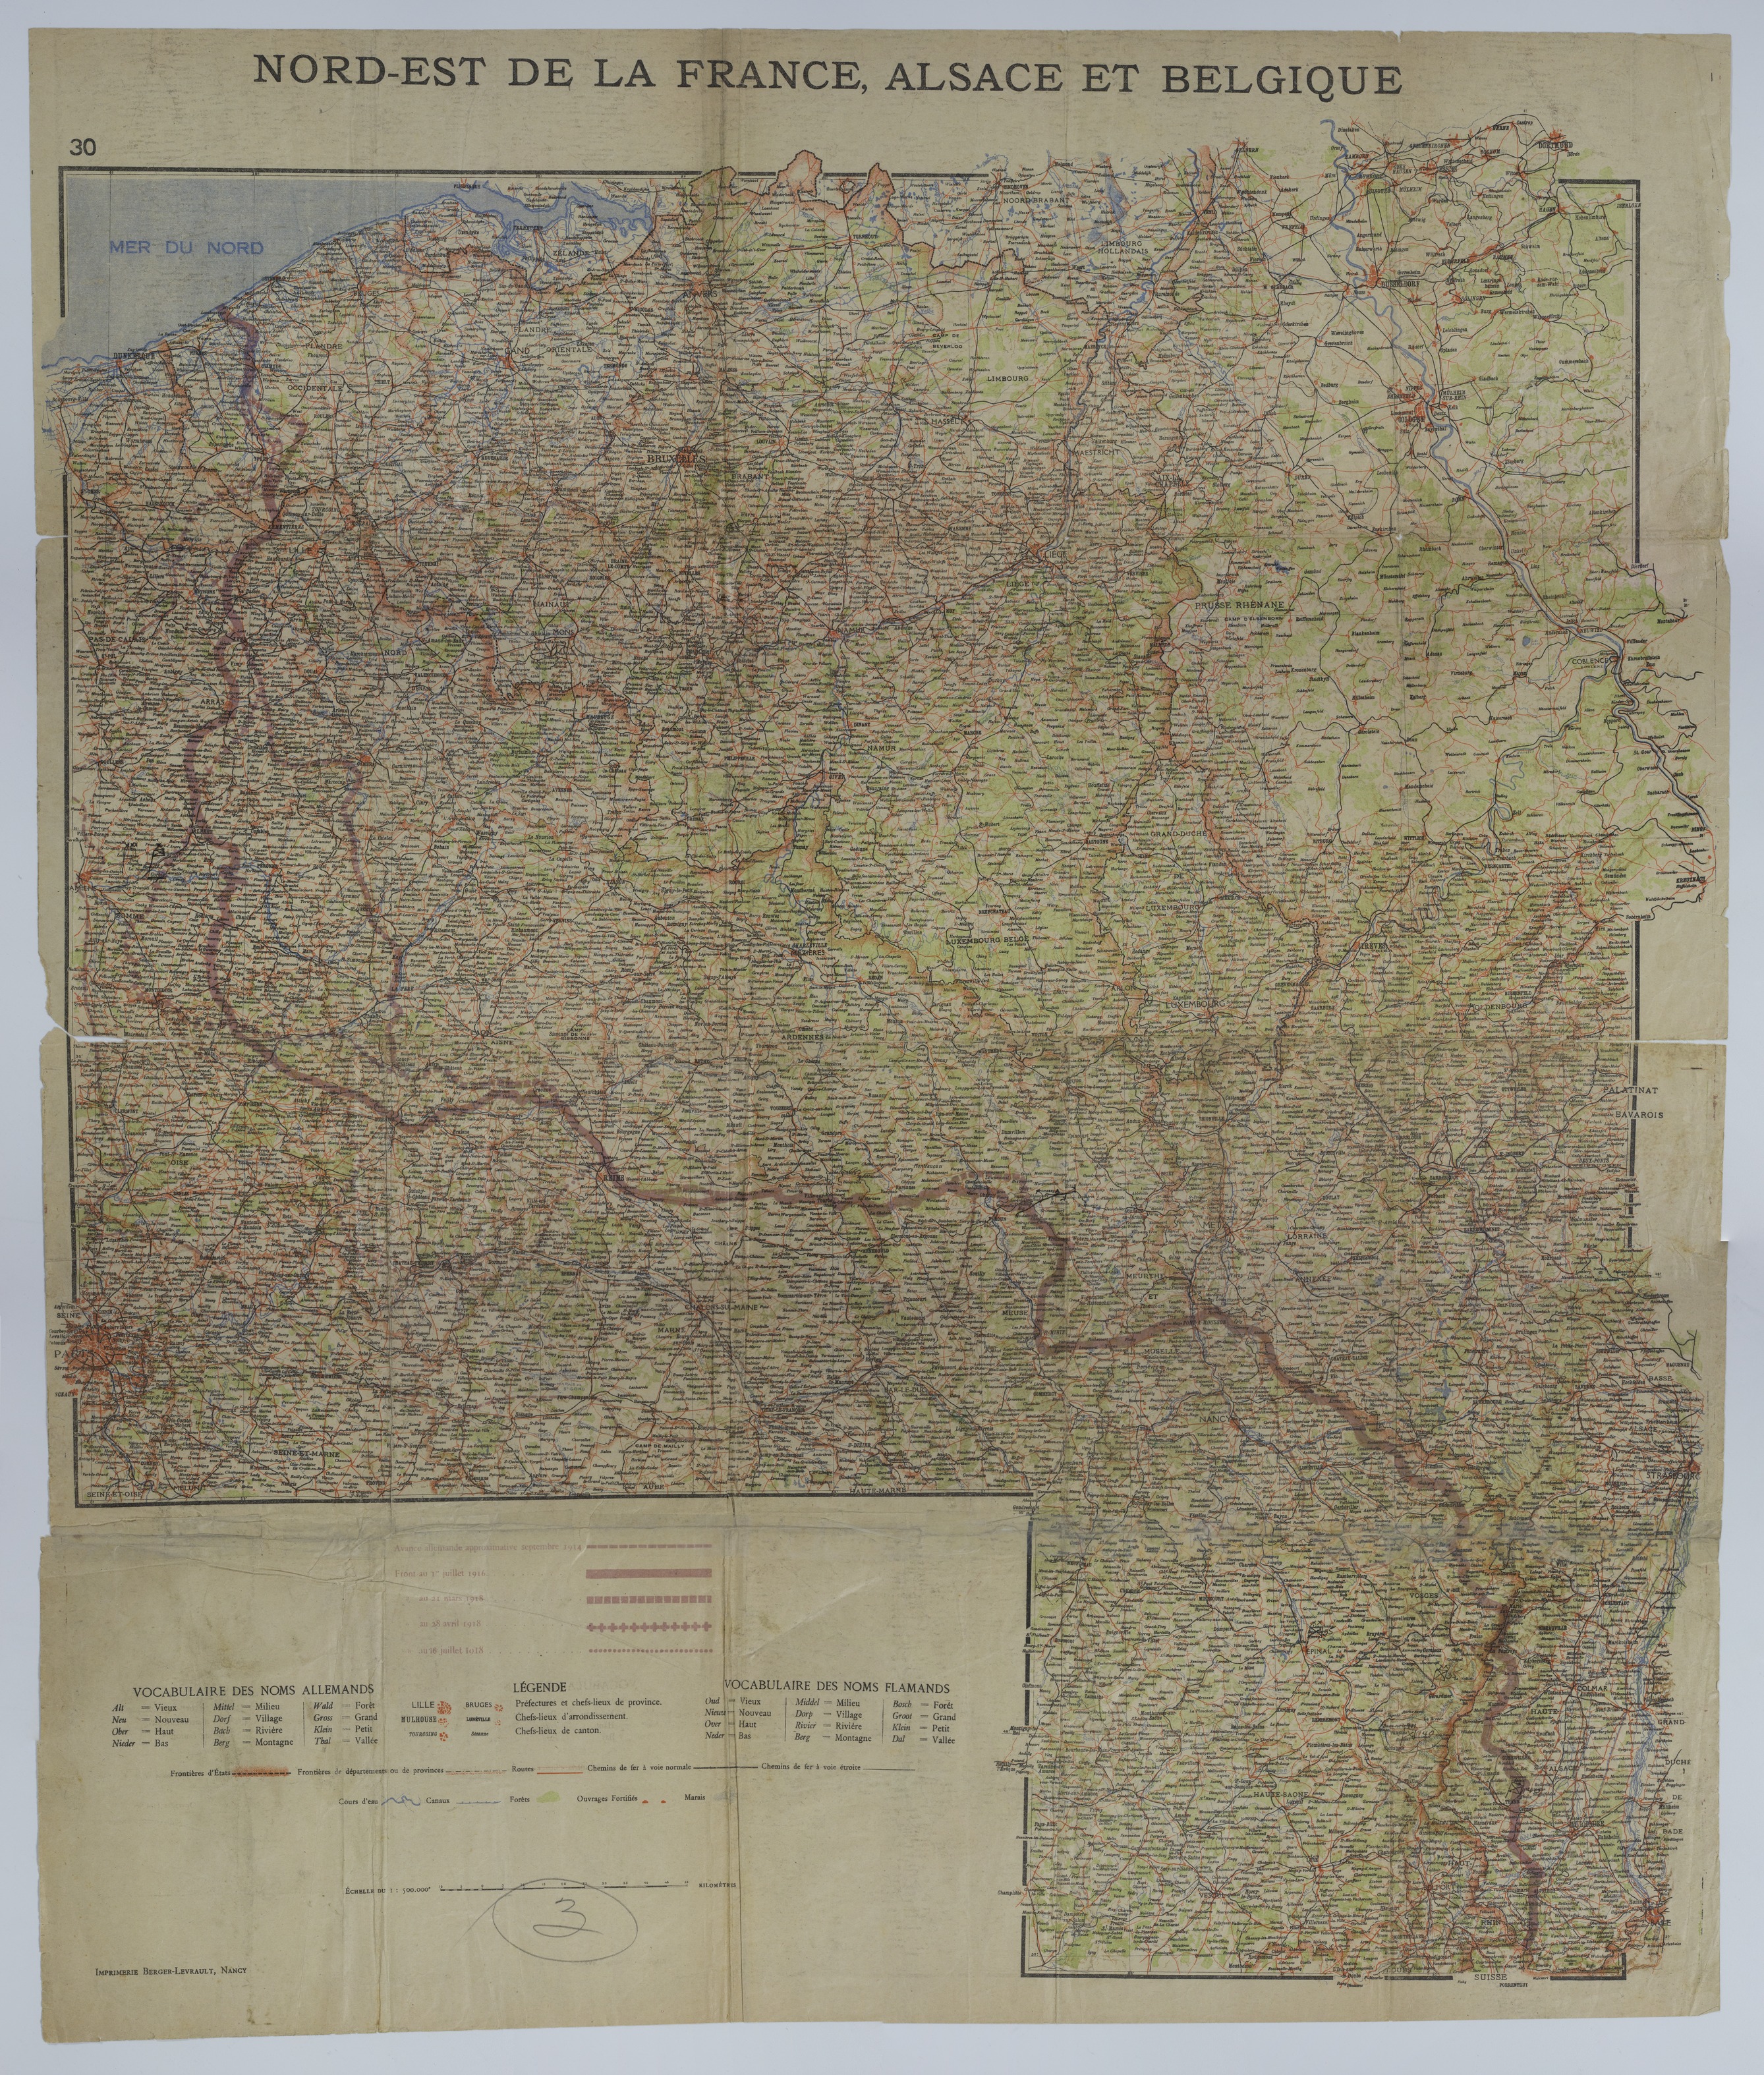 Map of the Front in Northeast France and Belgium